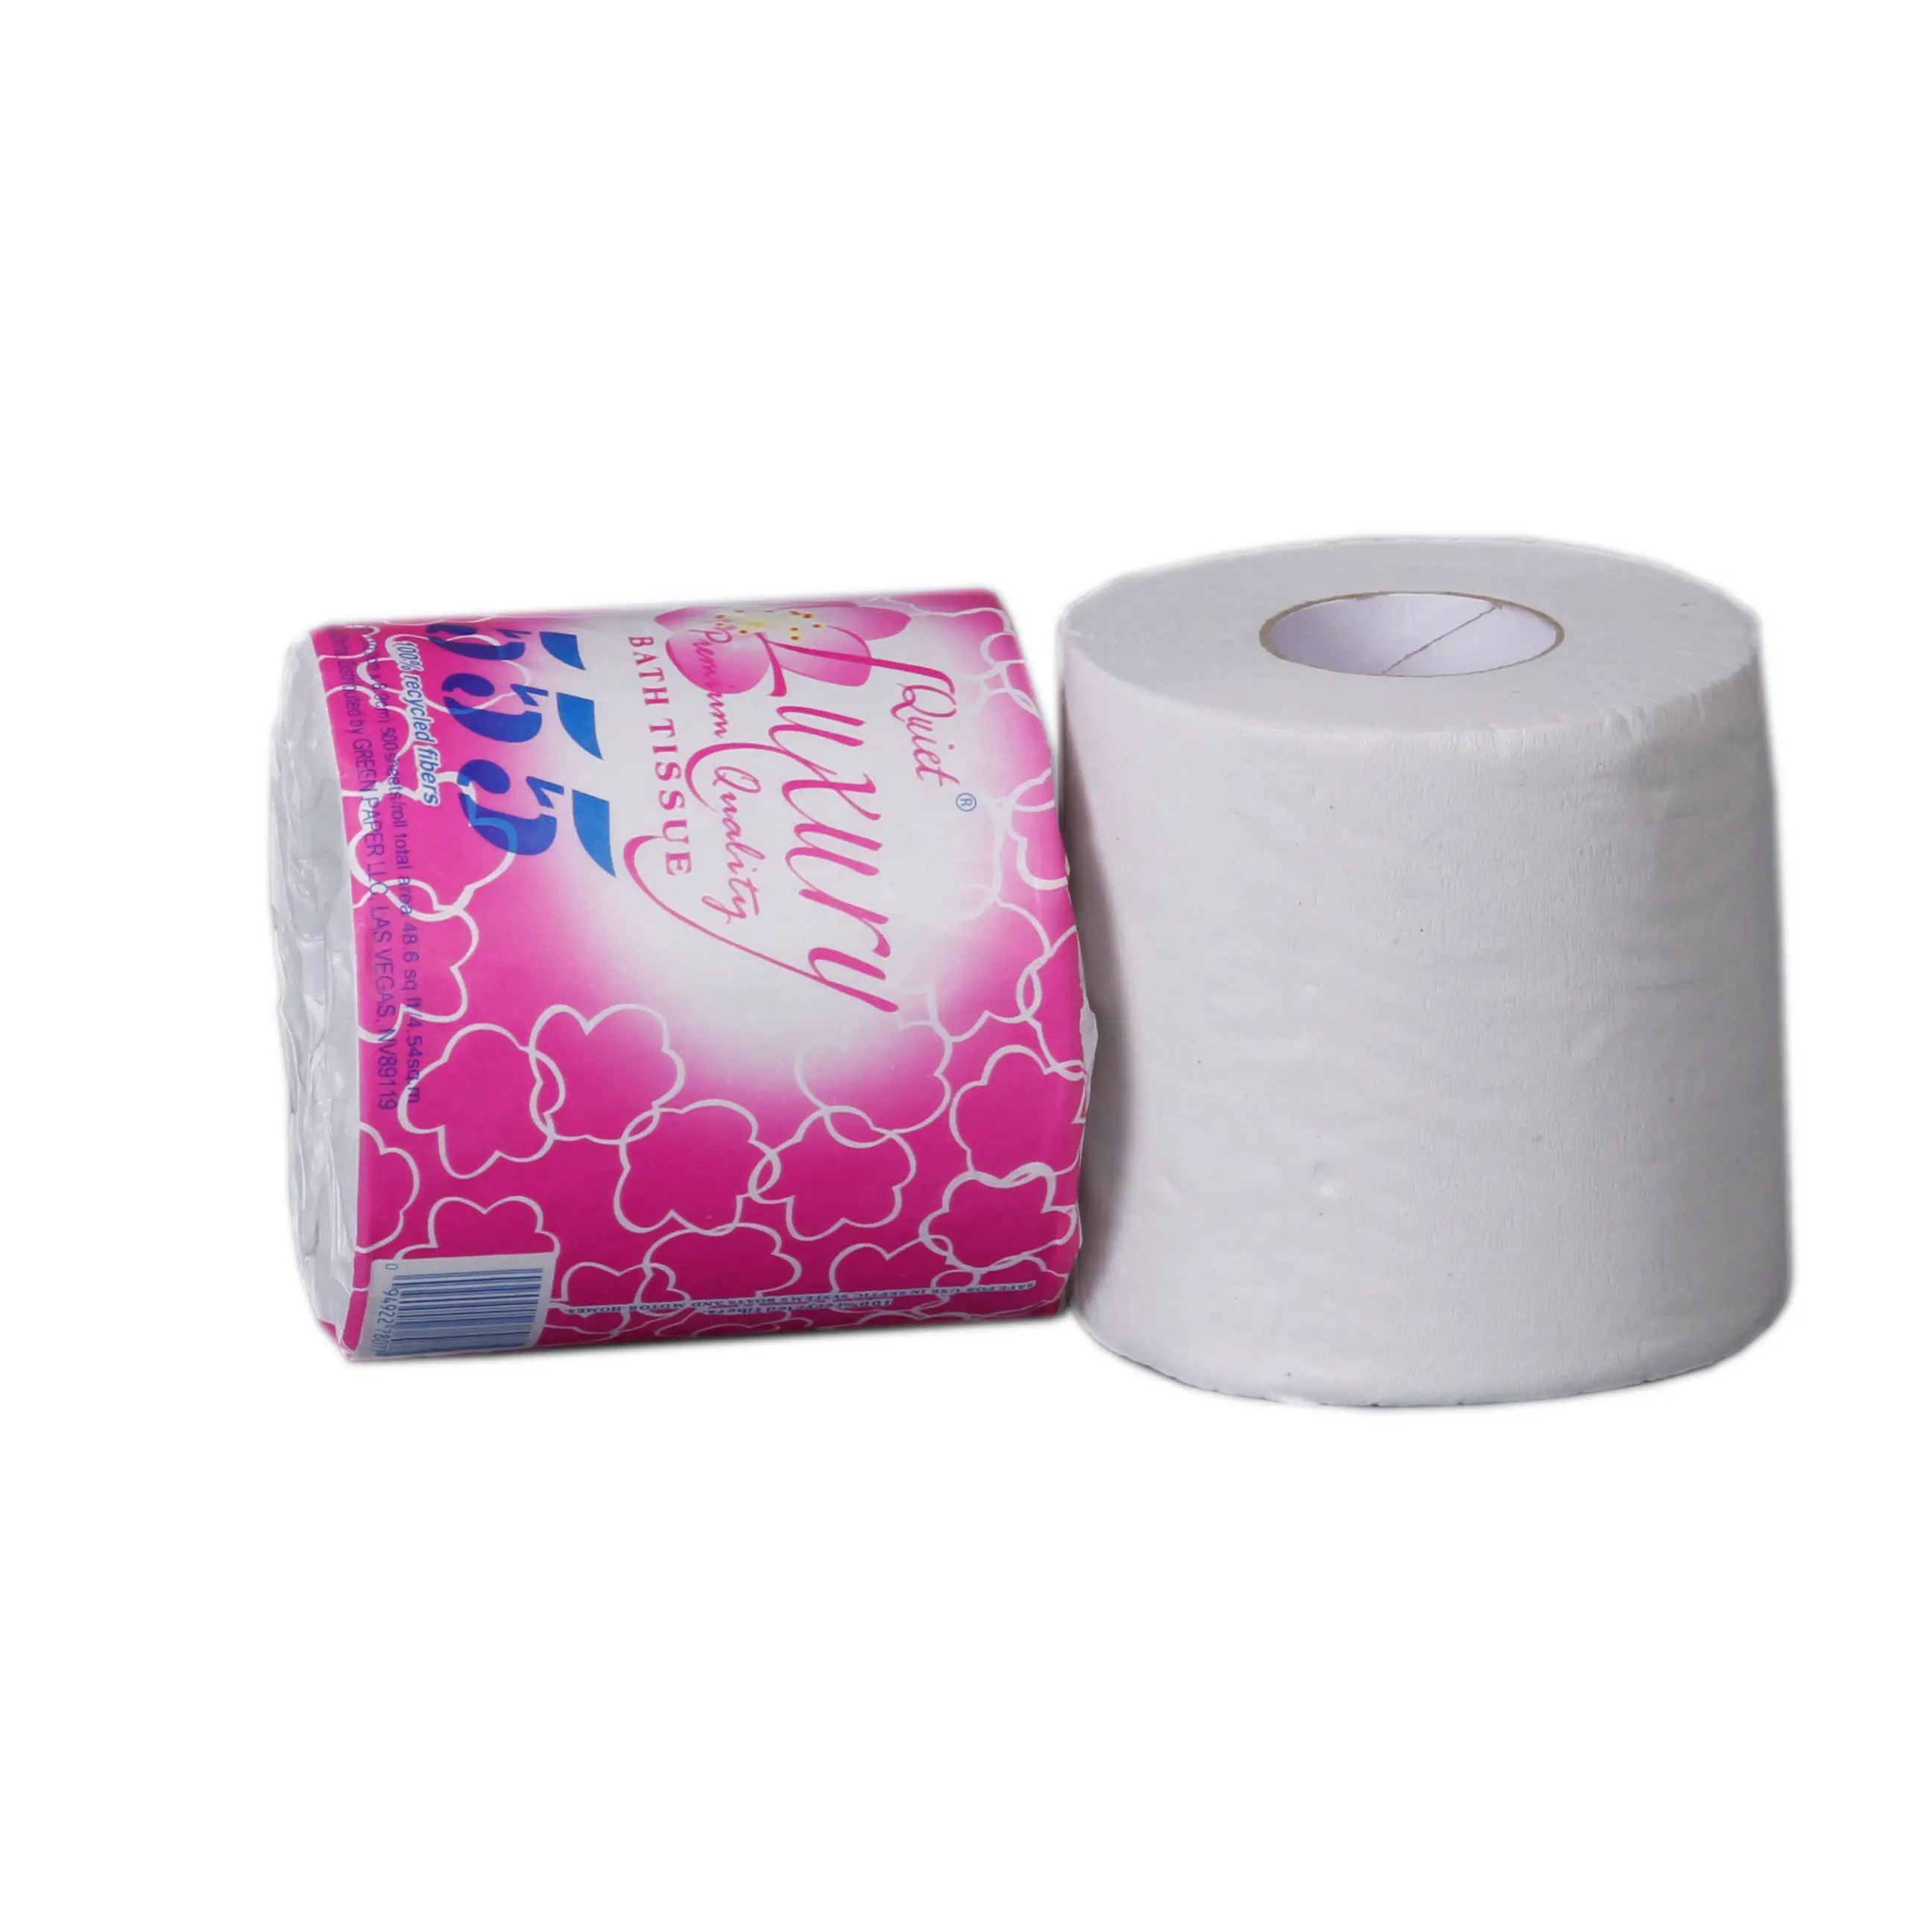 Papel Higienico,Wholesale Toilet Paper,High Quality Recycled Virgin ...